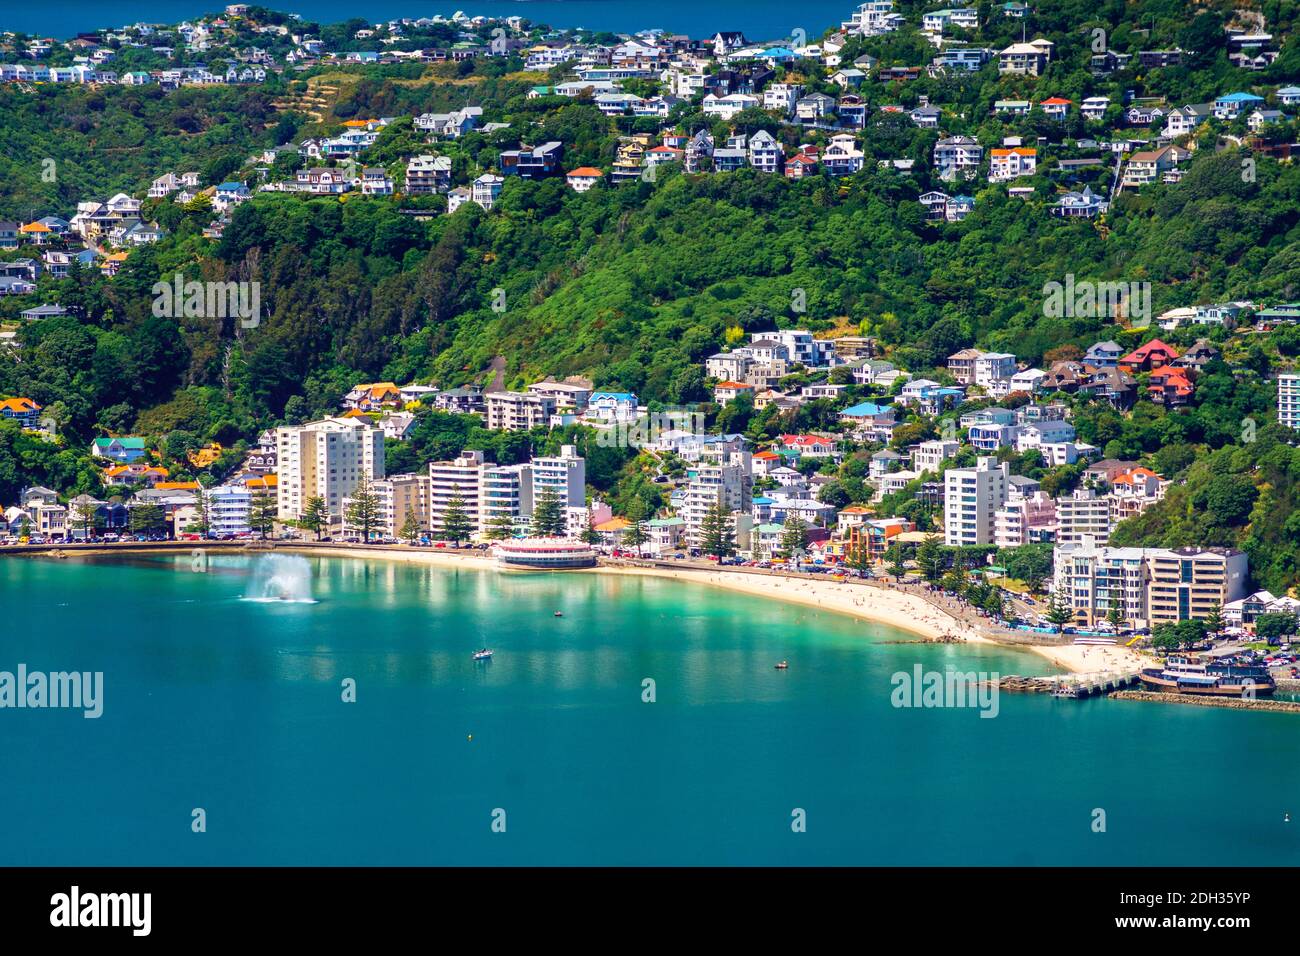 WELLINGTON, NEW ZEALAND - Feb 25, 2020: Afternoon view during summer looking across the harbour towards the popular inner city beach at Oriental Bay a Stock Photo